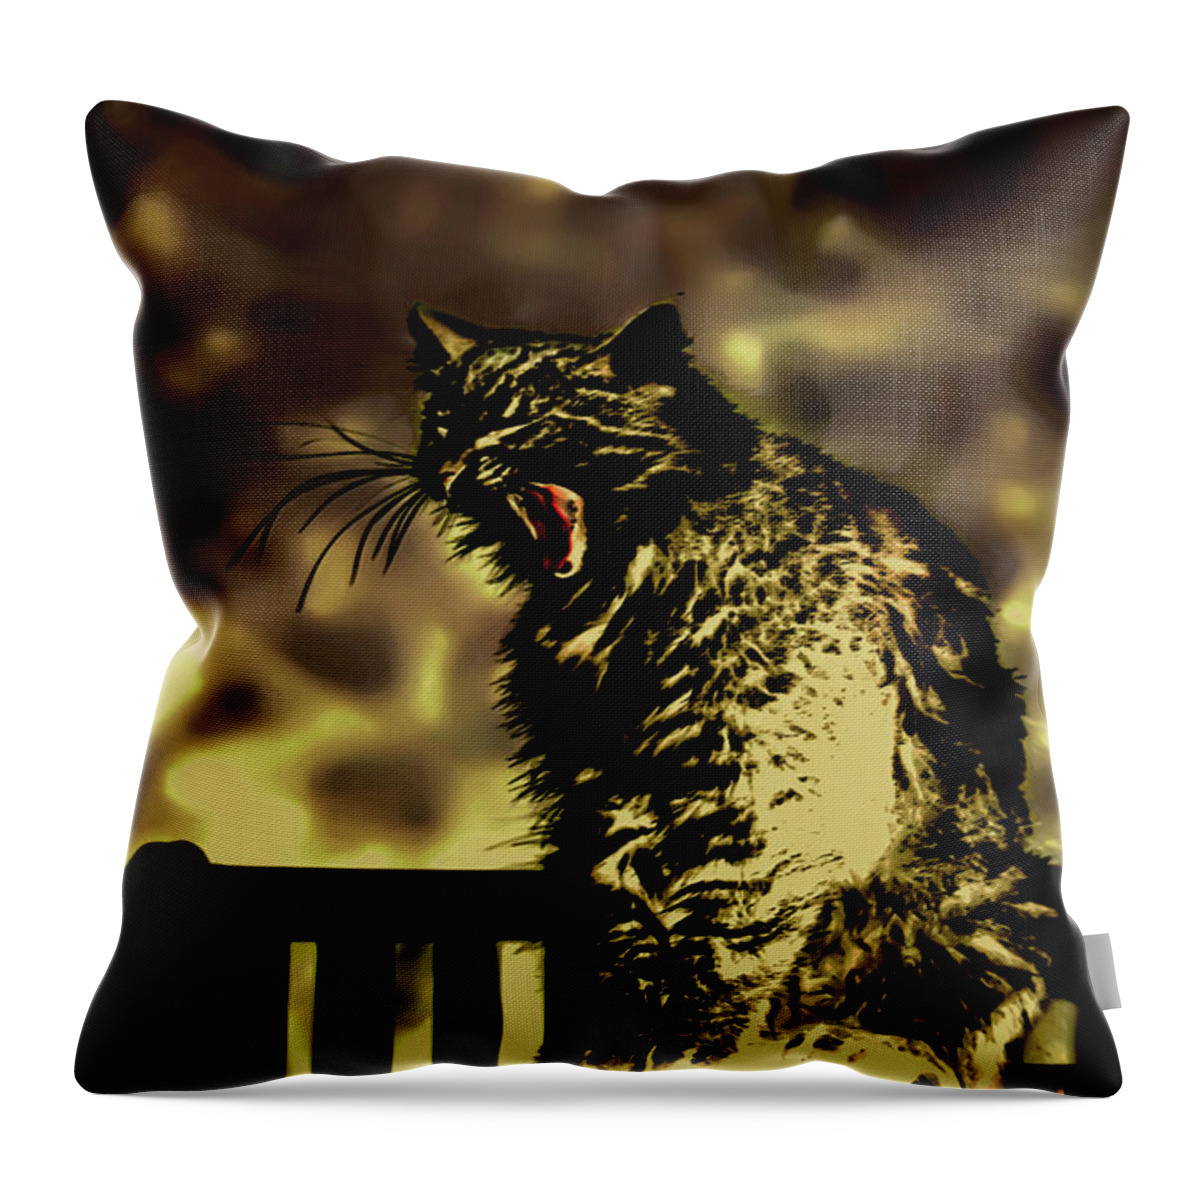 Surreal Throw Pillow featuring the photograph Surreal Cat Yawn by Gina O'Brien